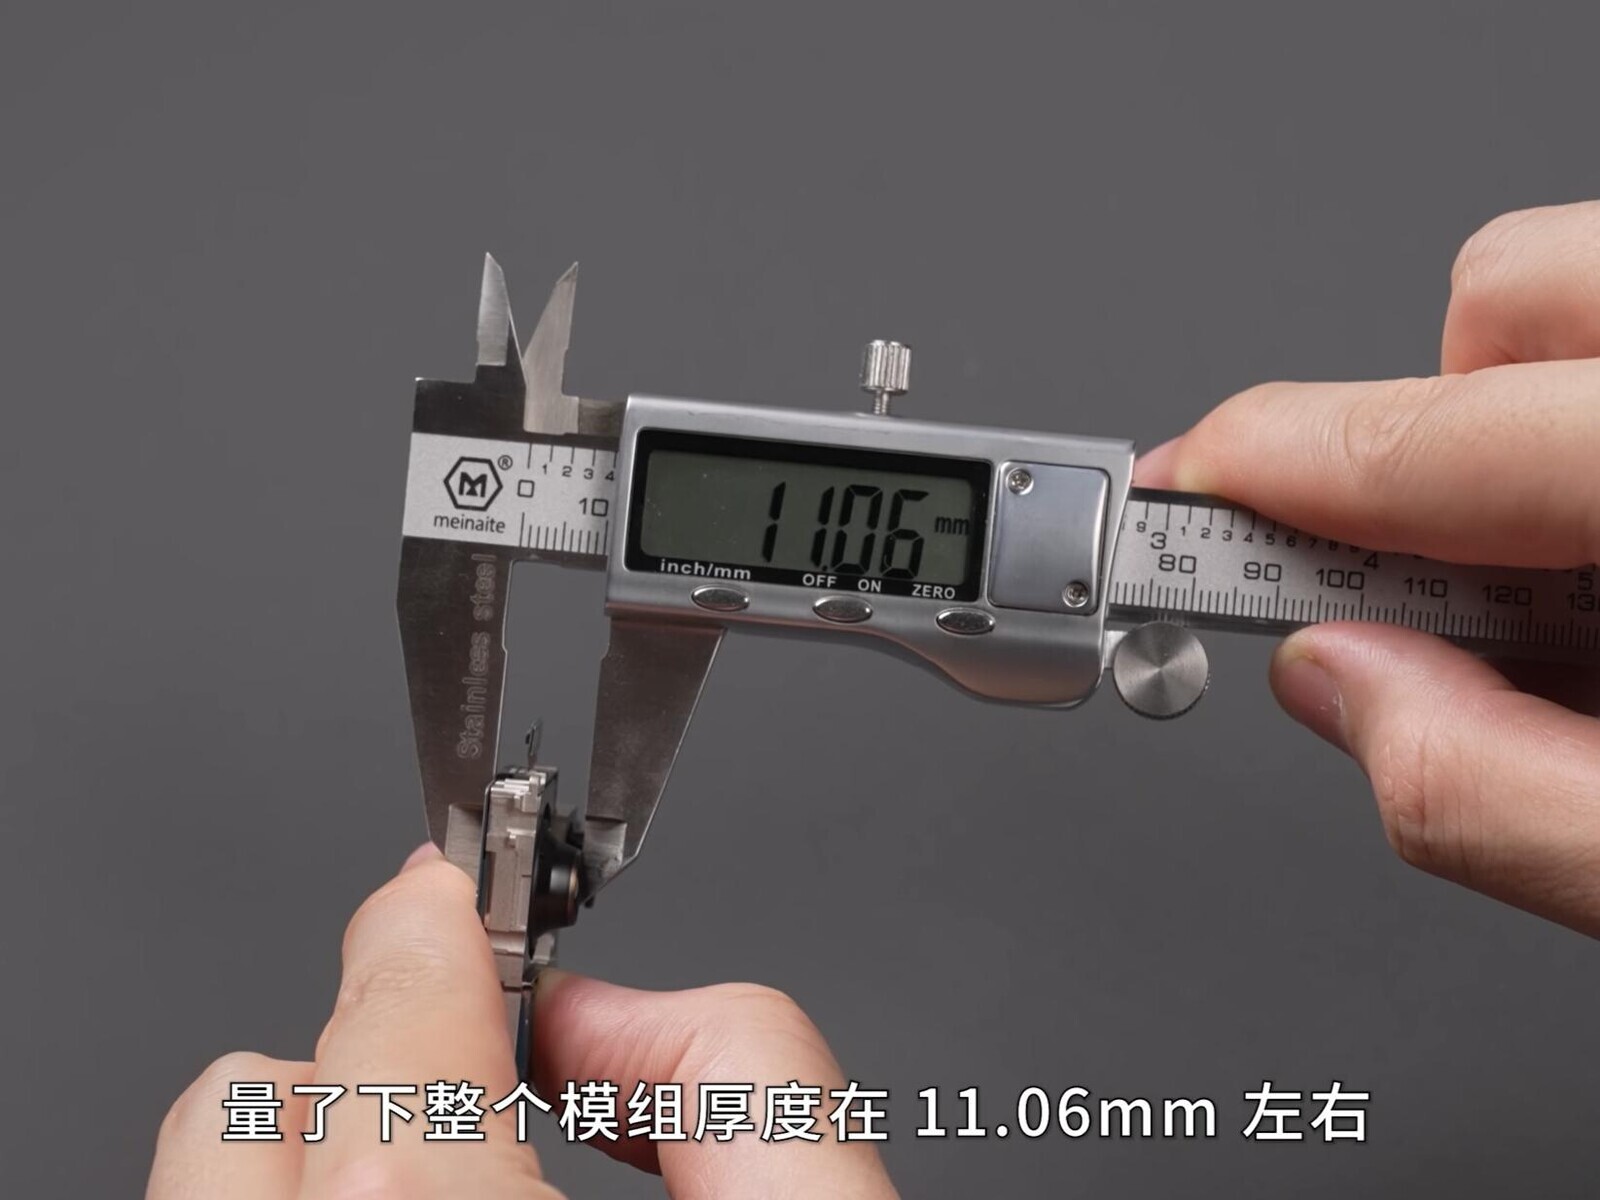 Xiaomi 12S Ultra teardown video highlights the scale of the Sony